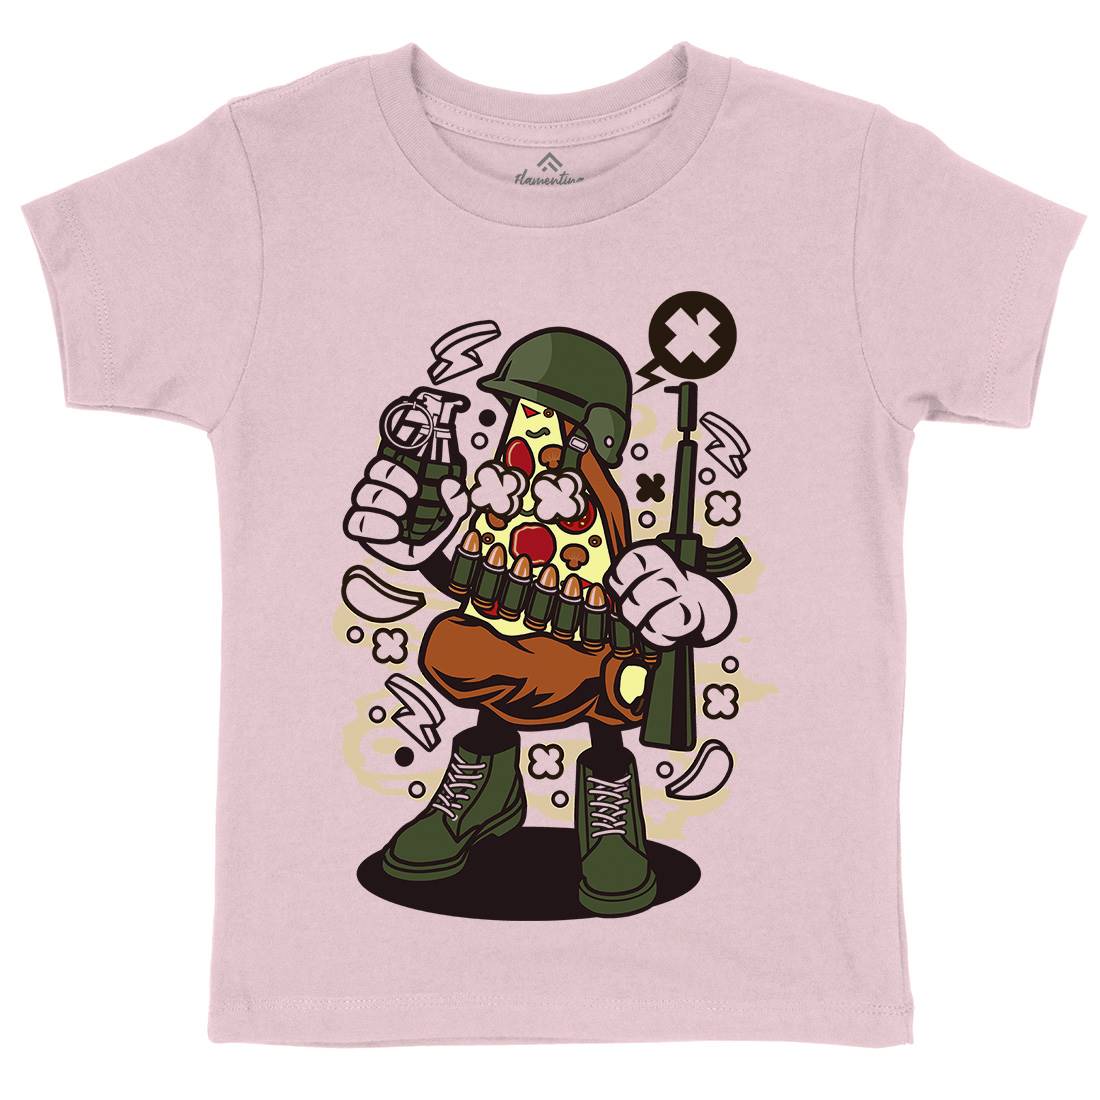 Soldier Pizza Kids Crew Neck T-Shirt Army C254